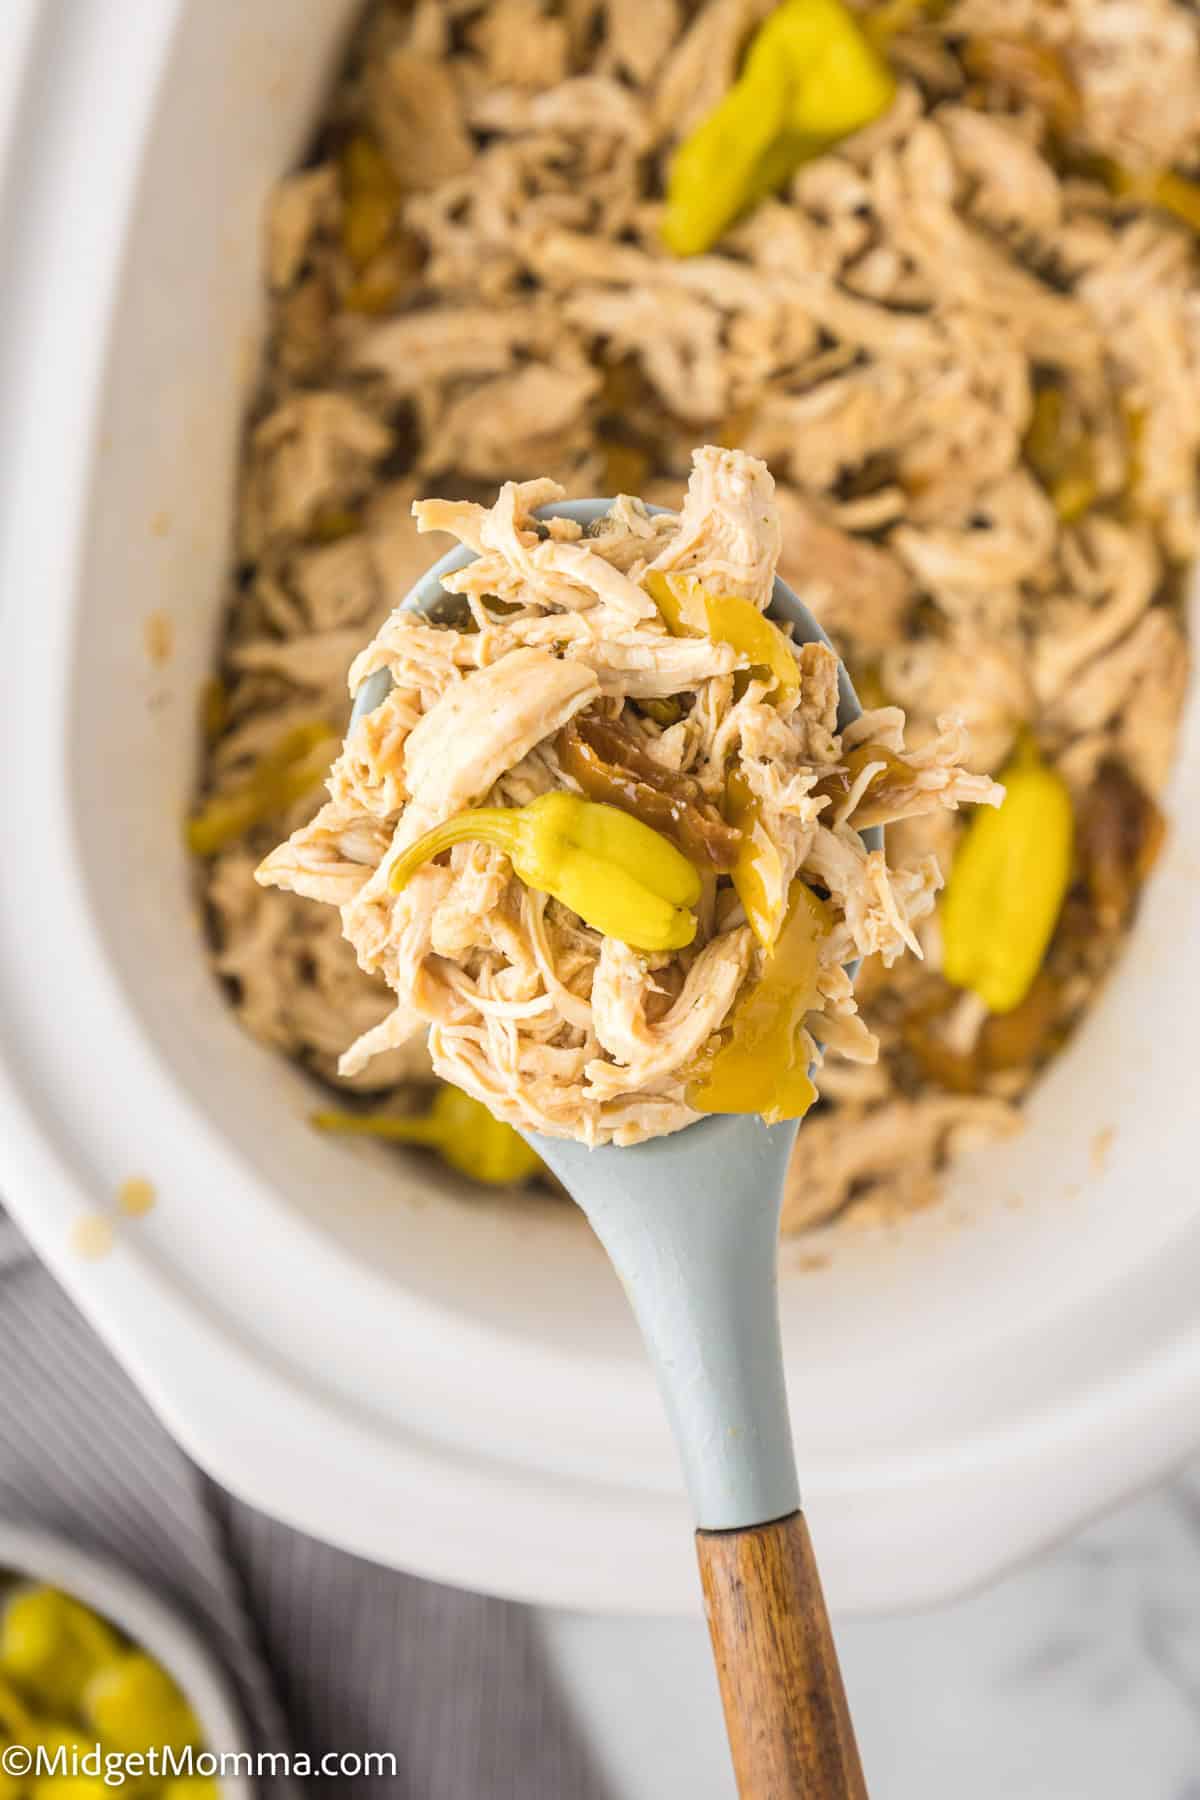 A spoon lifting shredded chicken with peppers from a slow cooker.